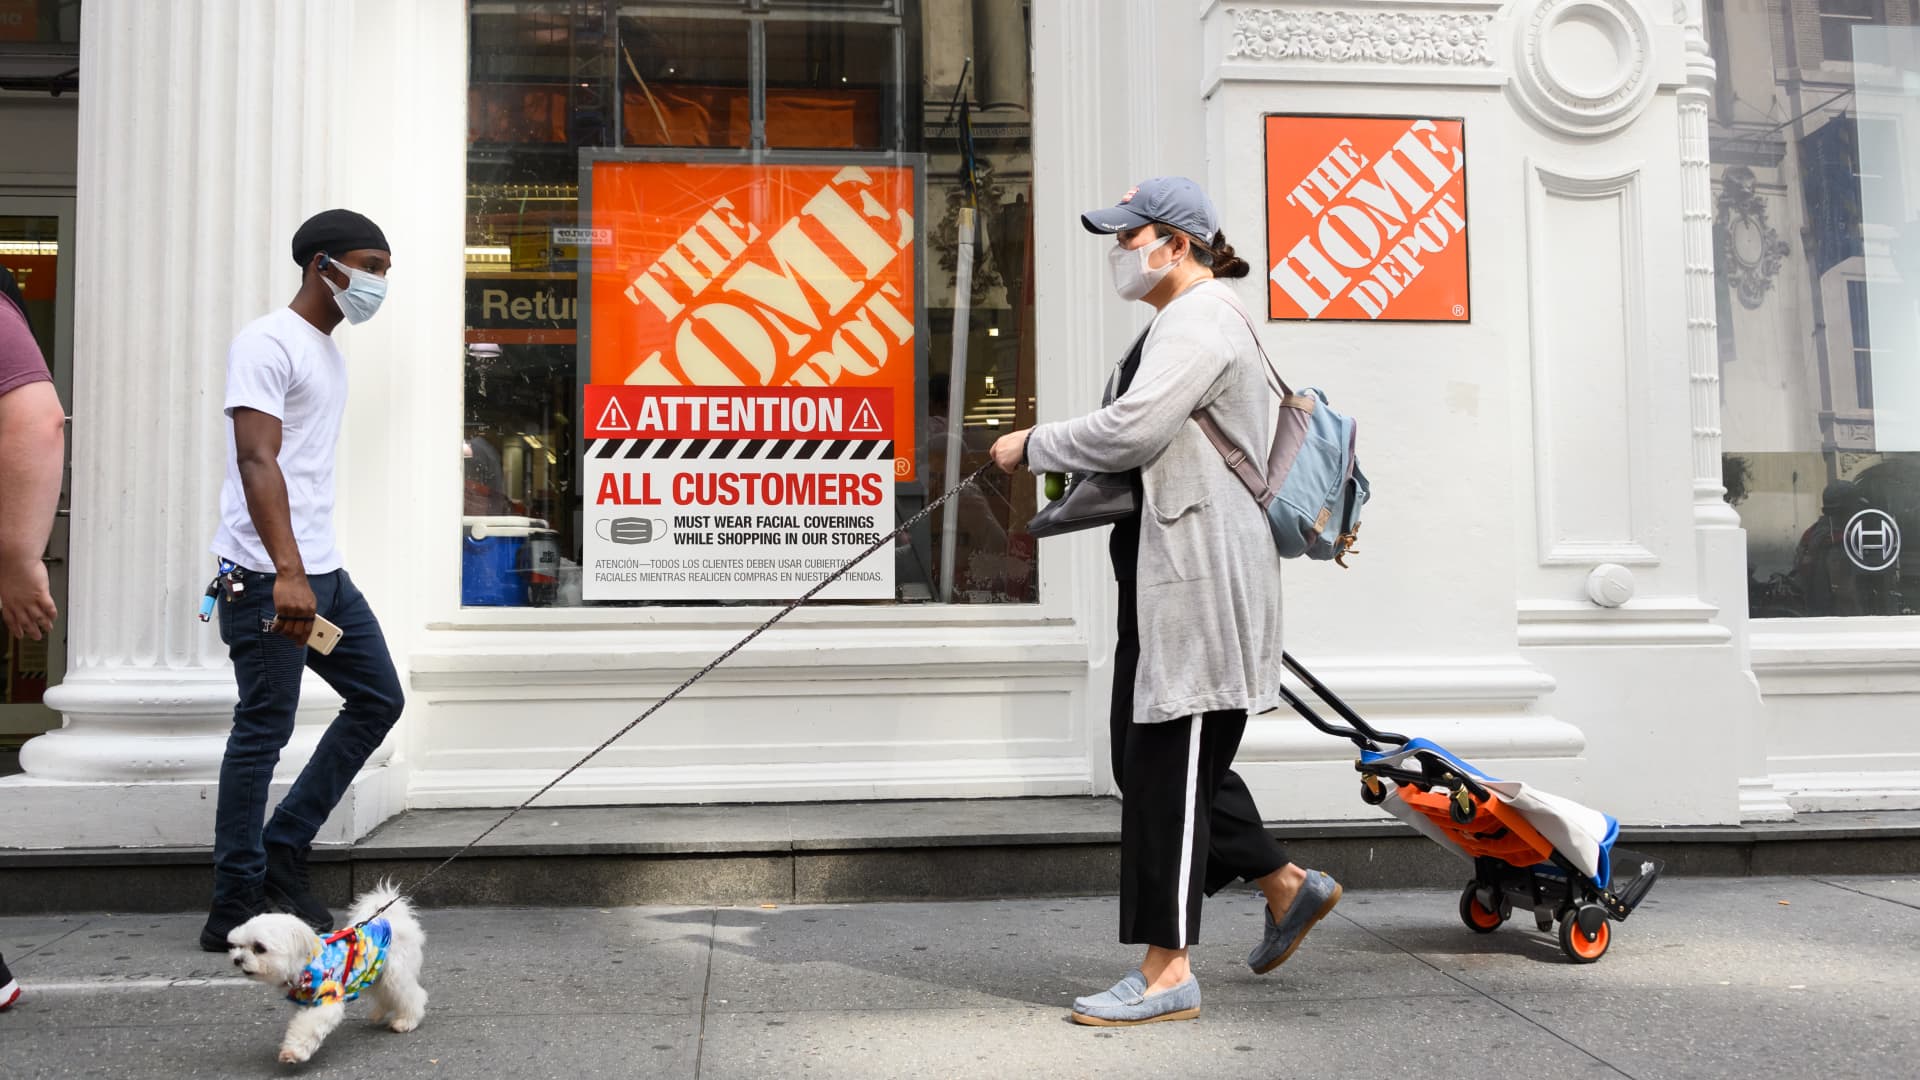 People wear protective face masks outside Home Depot in the Flatiron district as the city continues Phase 4 of re-opening following restrictions imposed to slow the spread of coronavirus on August 8, 2020 in New York City.